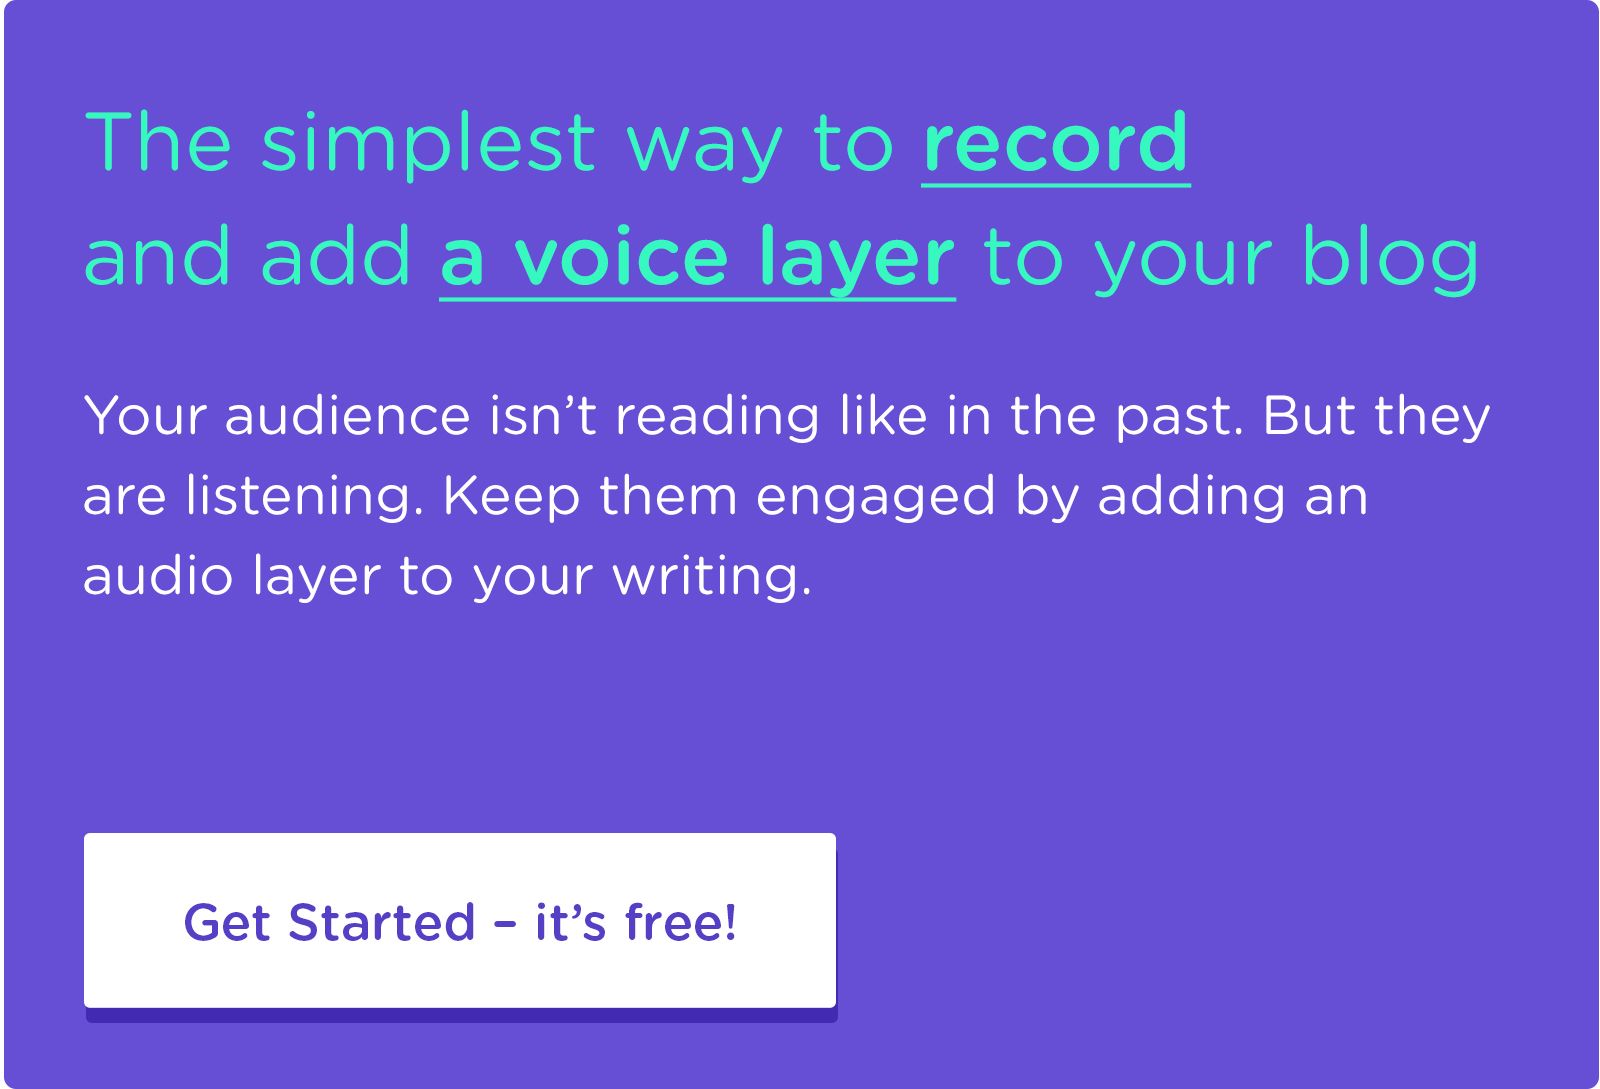 Three Ways to Get Started with Audio Blogging